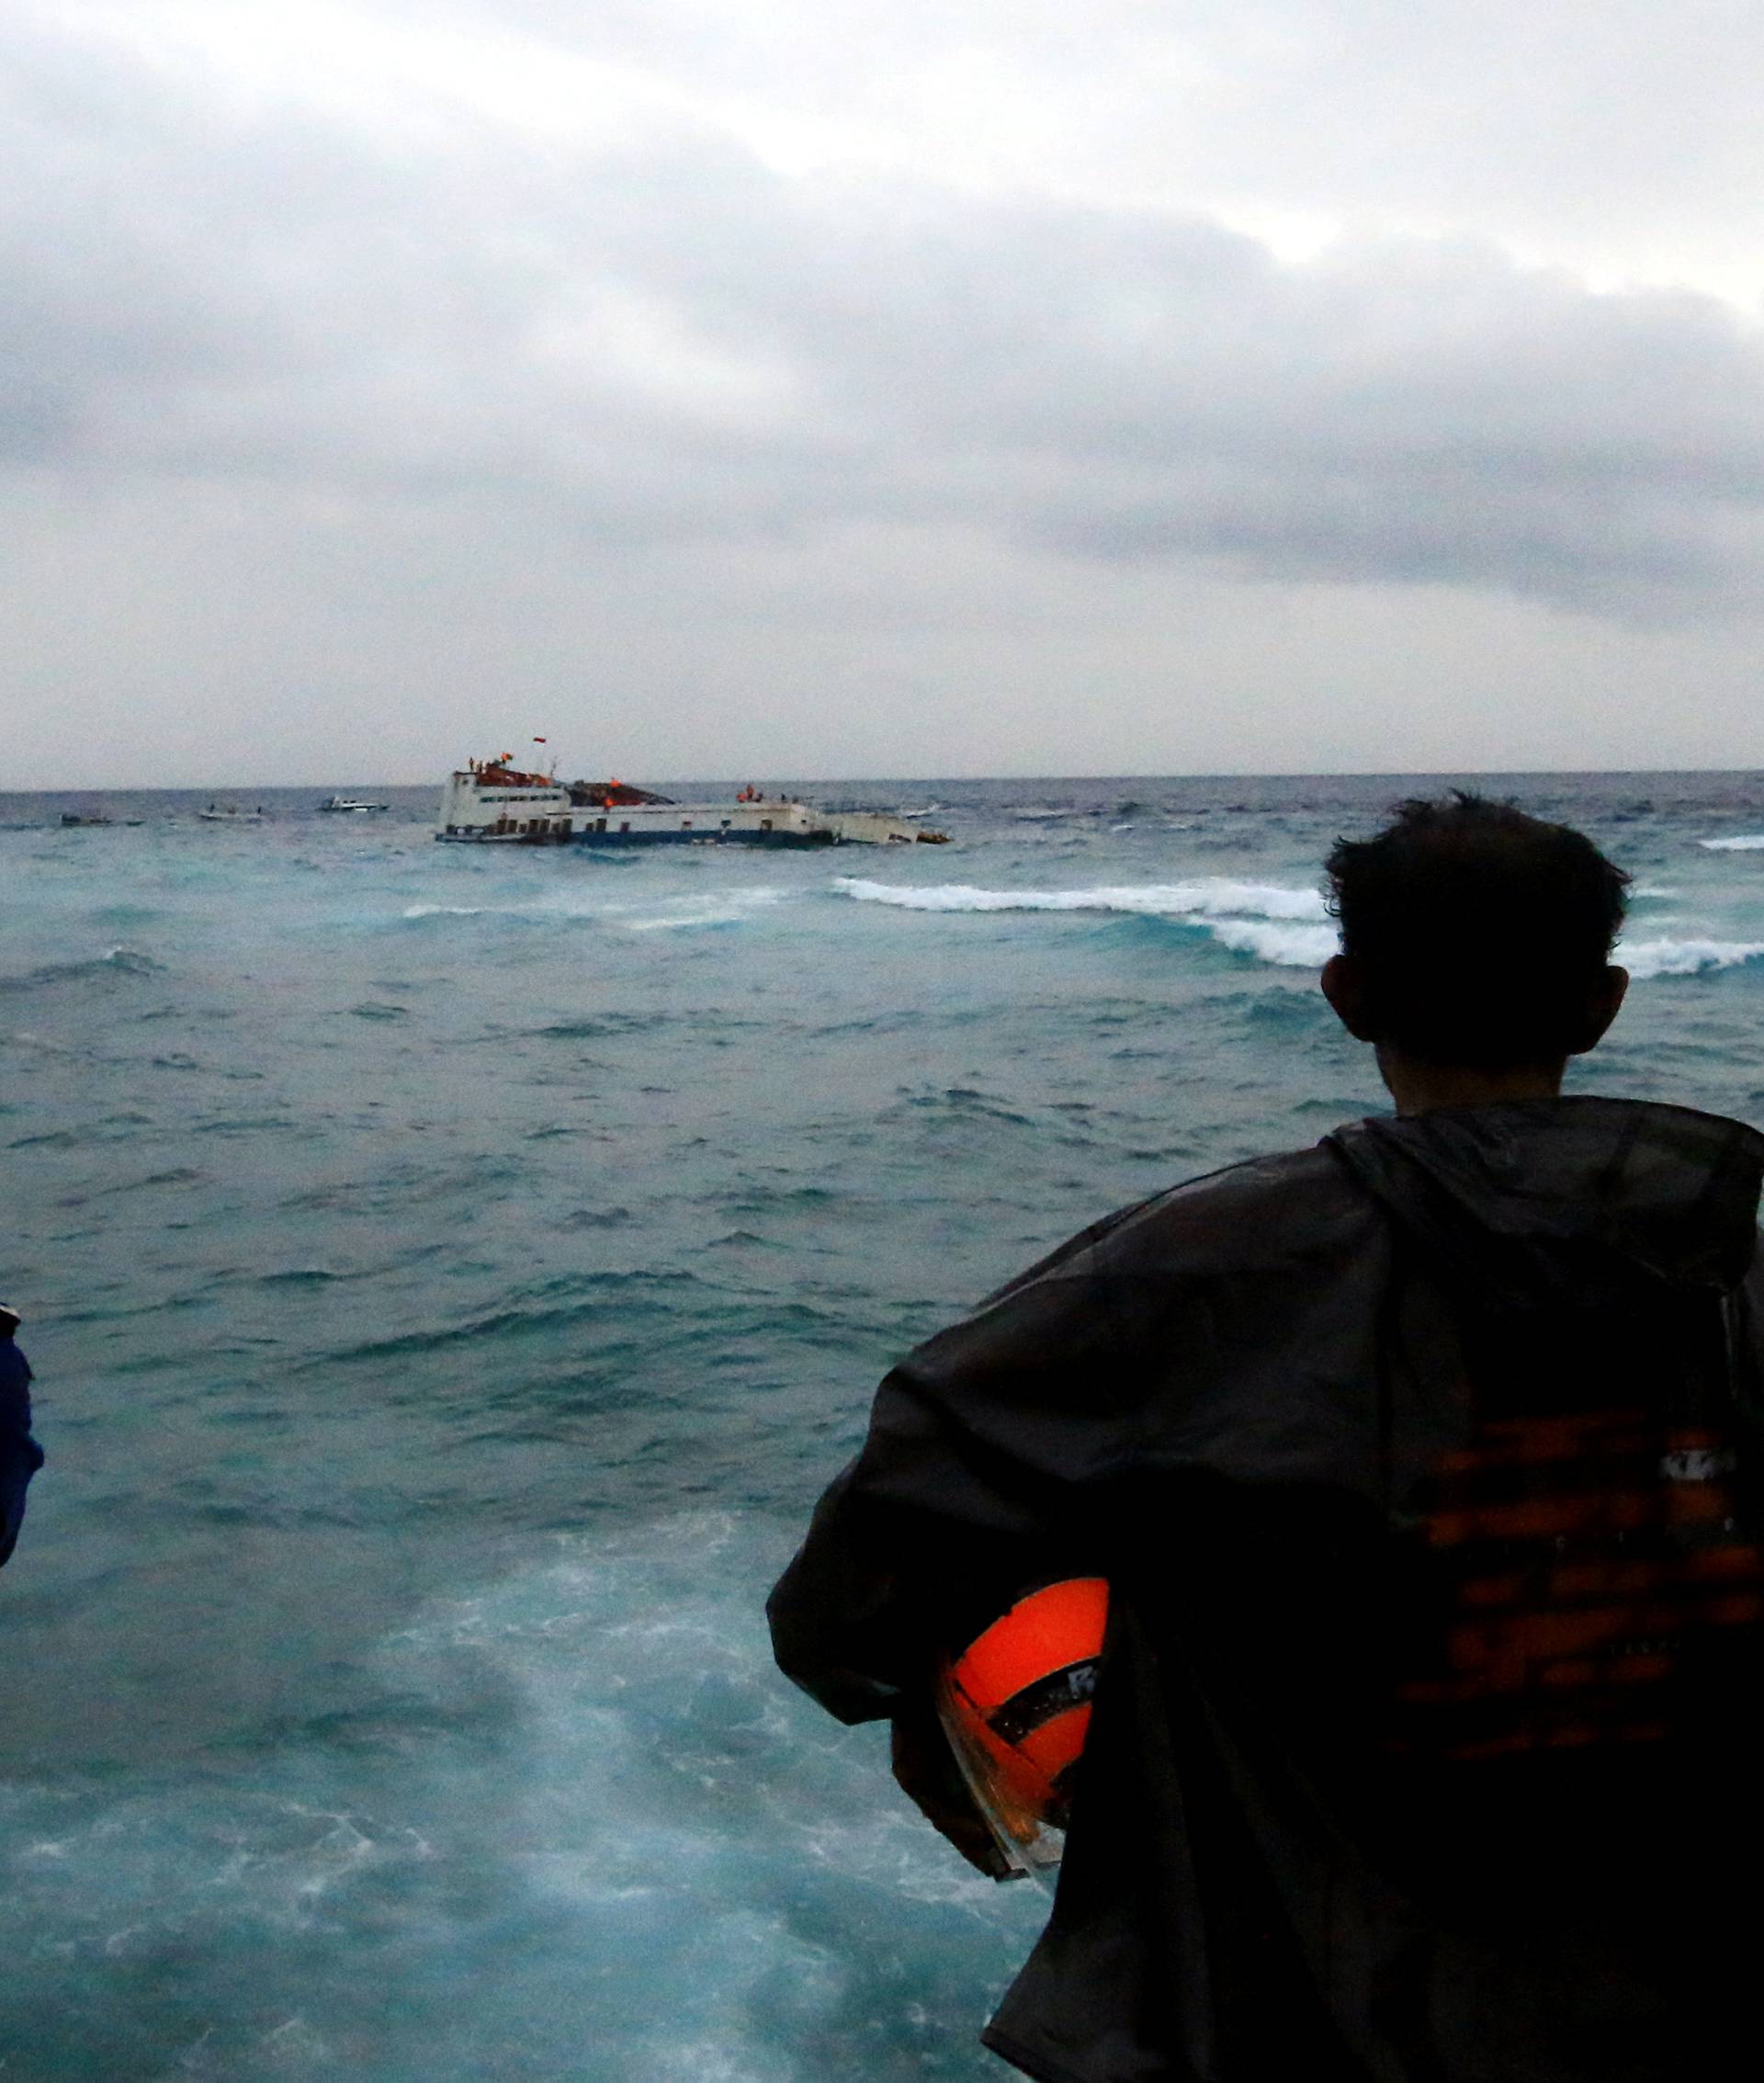 Villagers and officials stand as KM Lestari Maju boat sinks in the waters of Selayar island